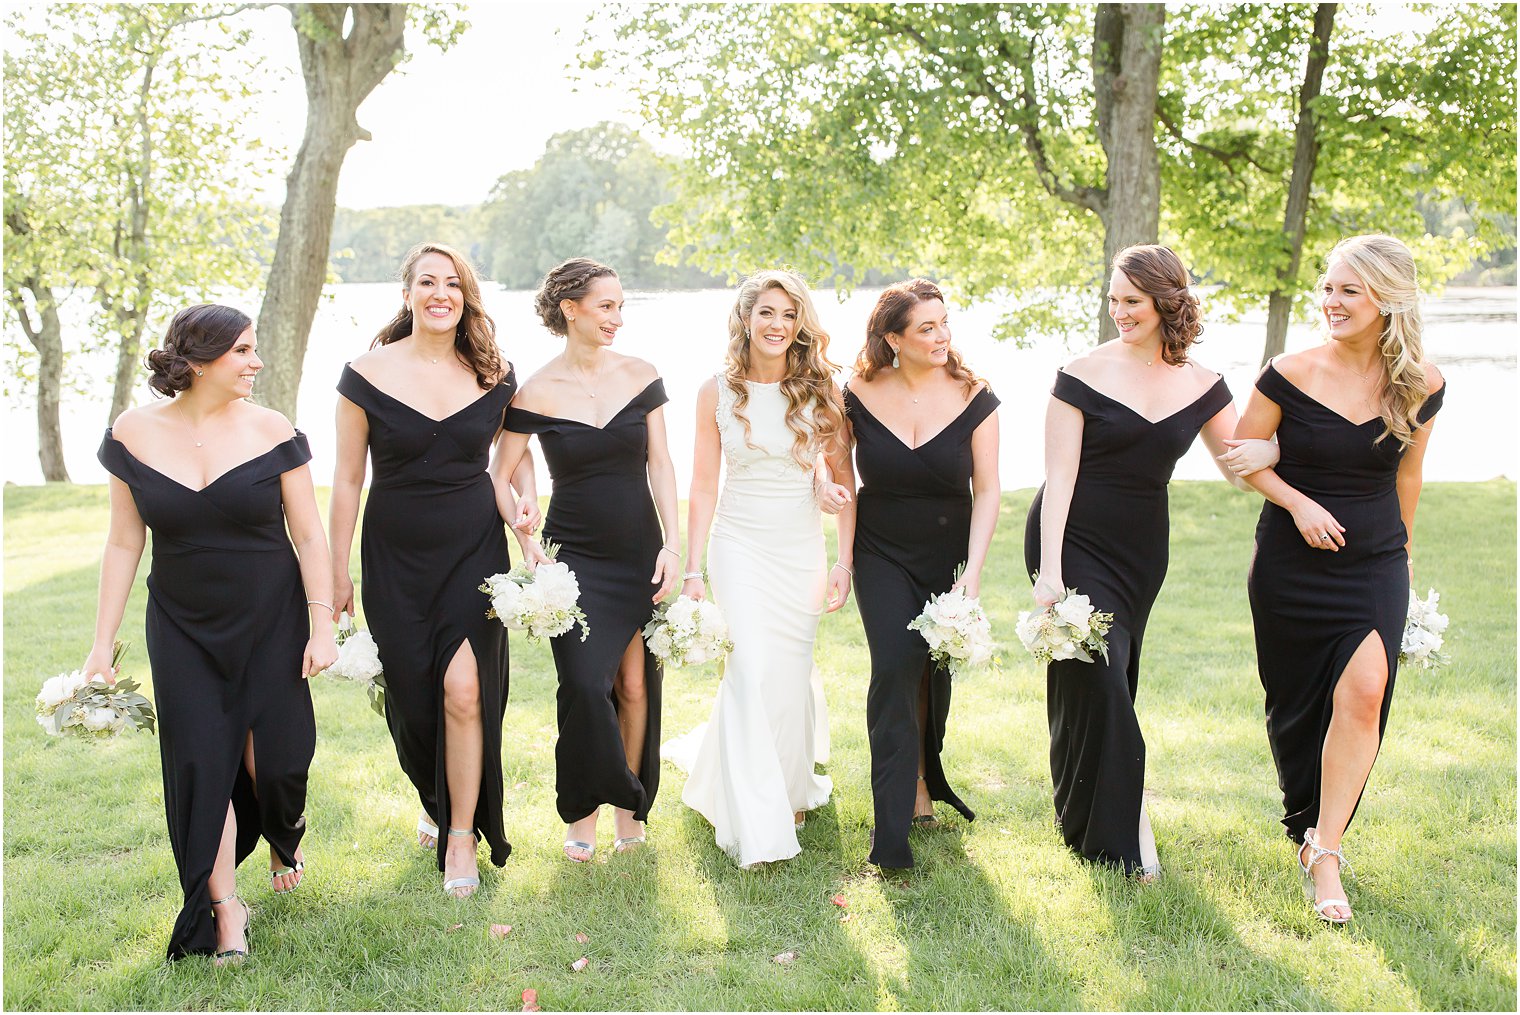 Candid photo of bride walking with her bridesmaids